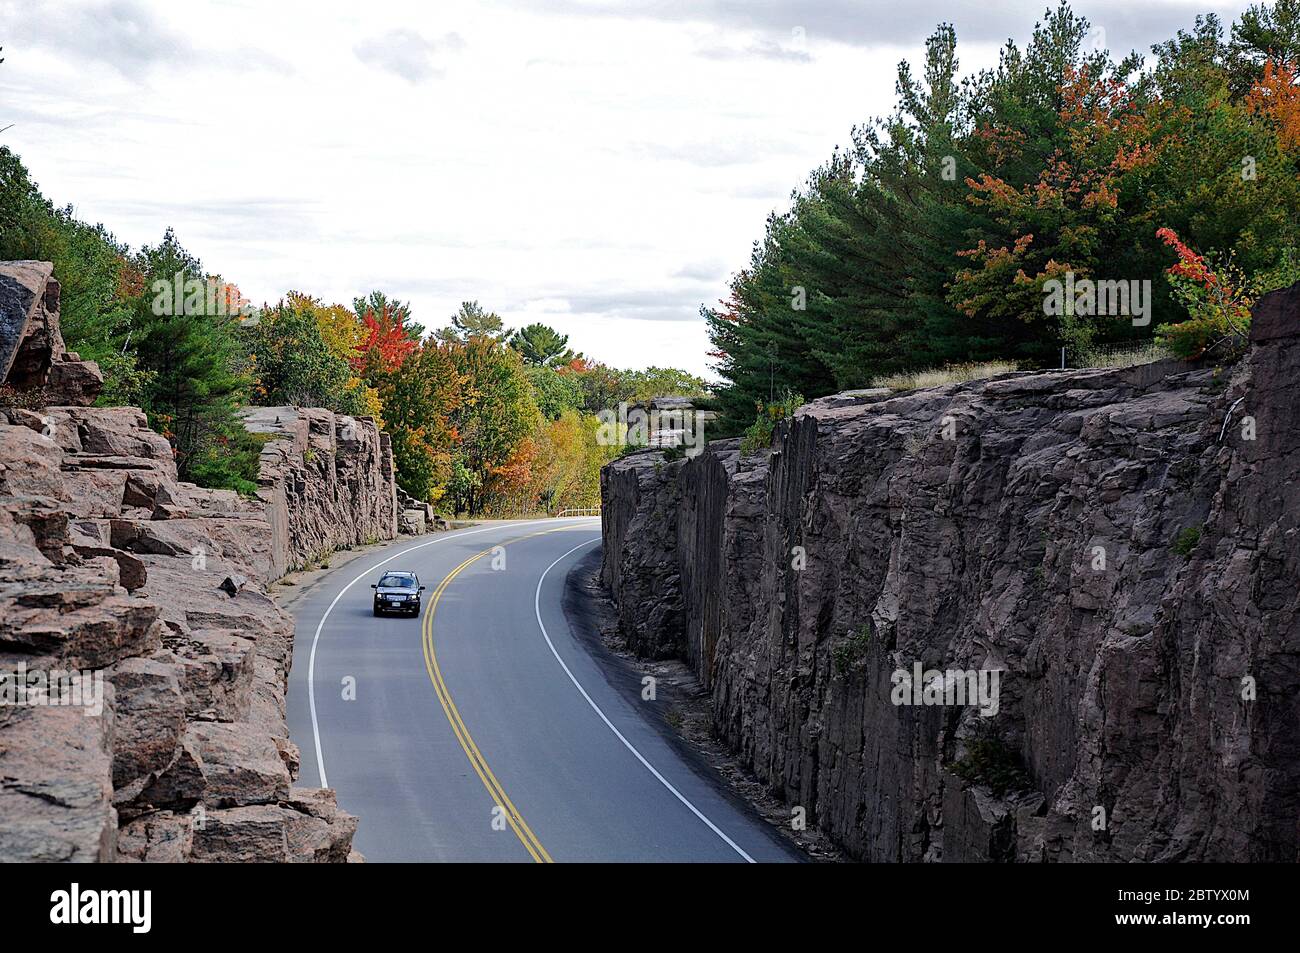 Milford Bay, Ontario / Canada - 10/05/2008: High angle view of Mountain road. Landscape with rocks, autumn leaves color, and beautiful asphalt road Stock Photo